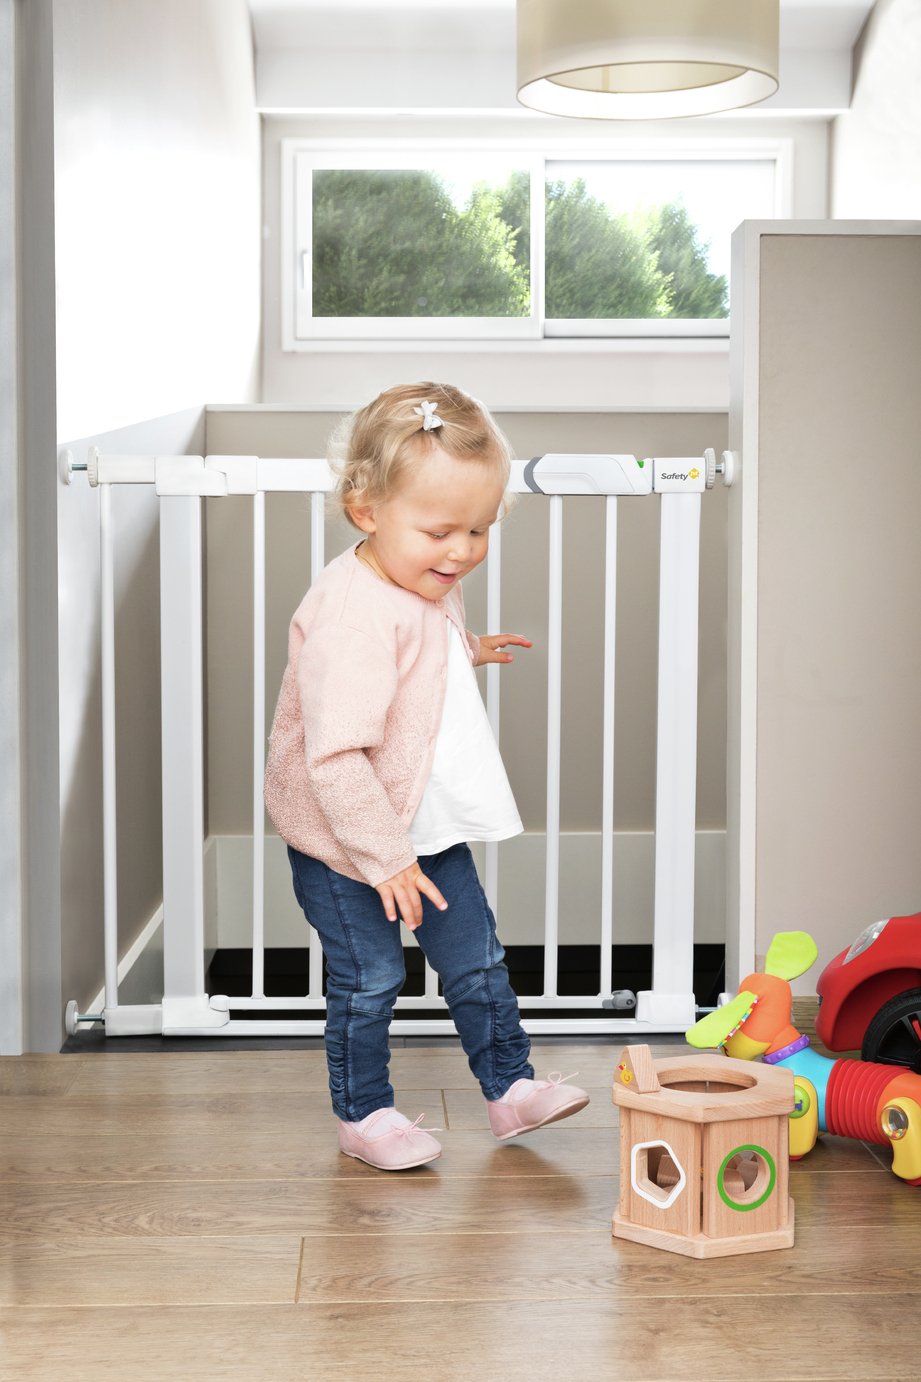 Safety 1st Pressure Fit Flat Step Safety Gate Review